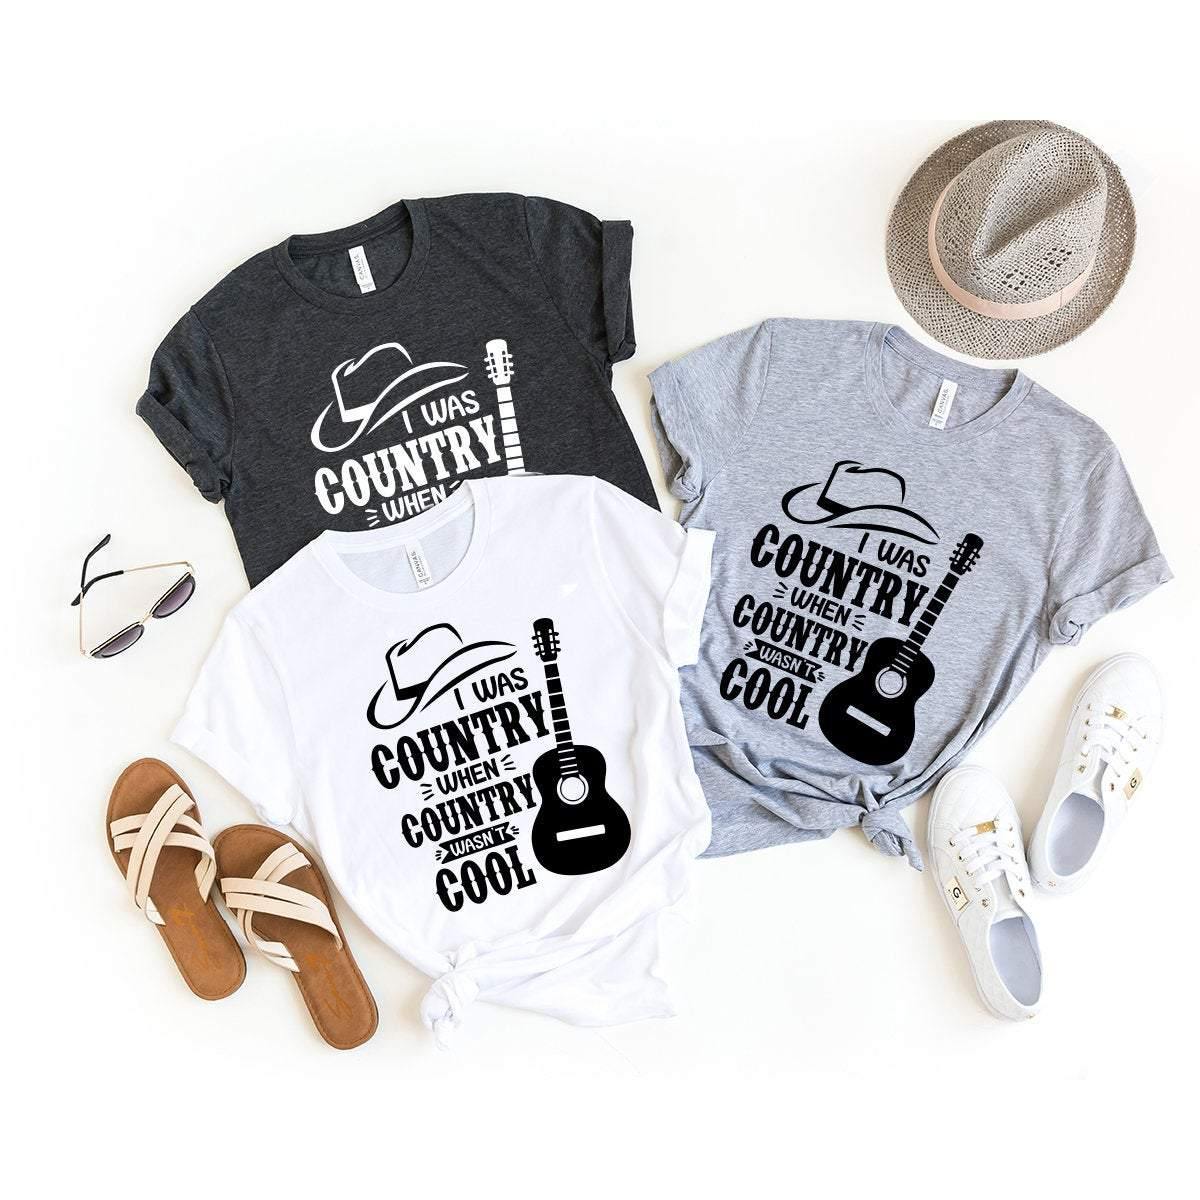 Country Lover Shirt, Country Music Shirt, I Was Country When Country Wasn't Cool , Country Girl Shirt, Cowgirl T-Shirt, Barbara Mandrell Tee - Fastdeliverytees.com